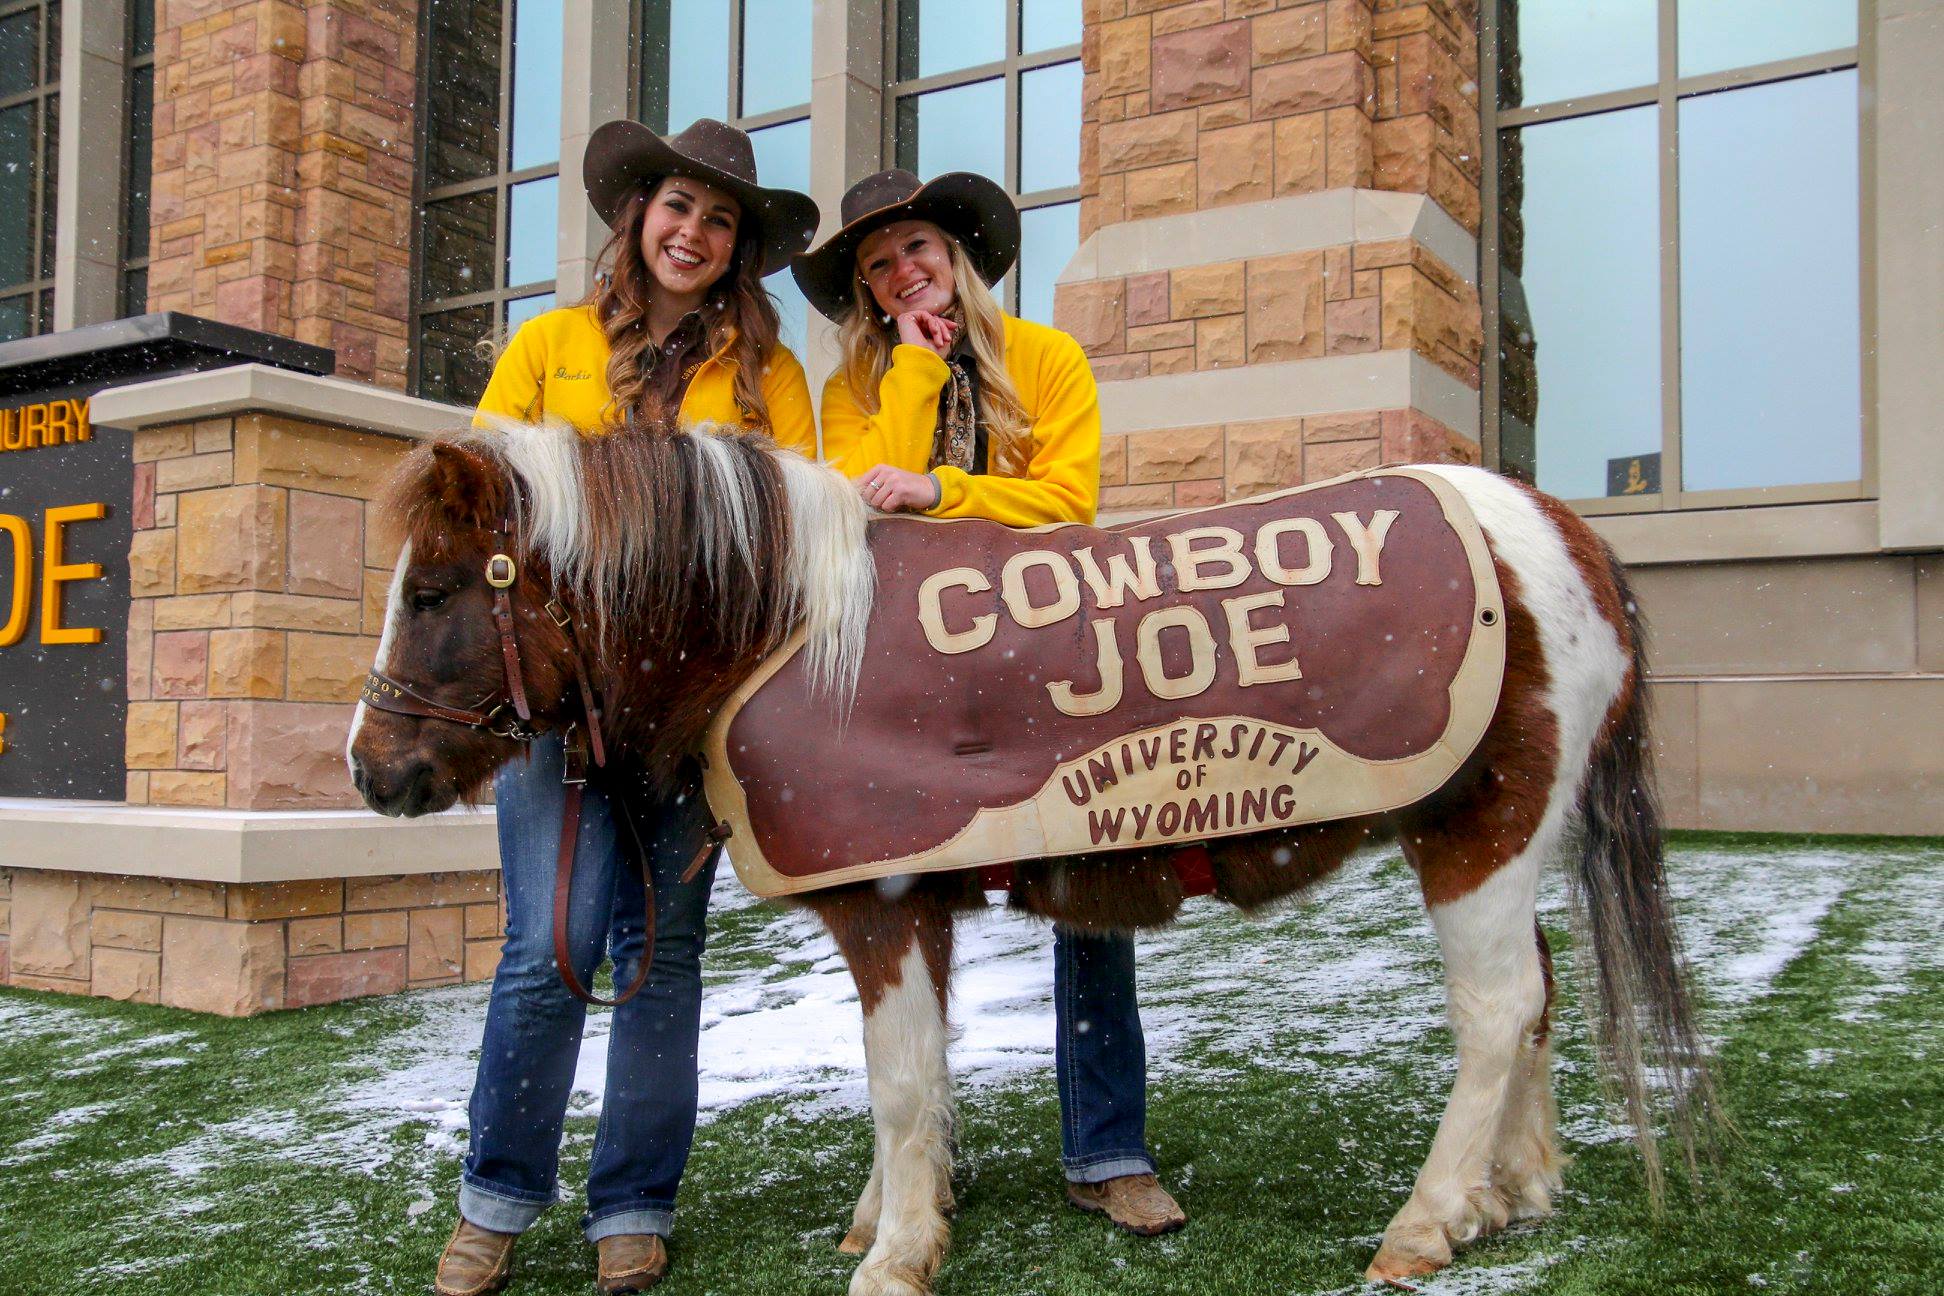 A pony with a cover that says Cowboy Joe University of Wyoming, posing with two women in cowboy hats